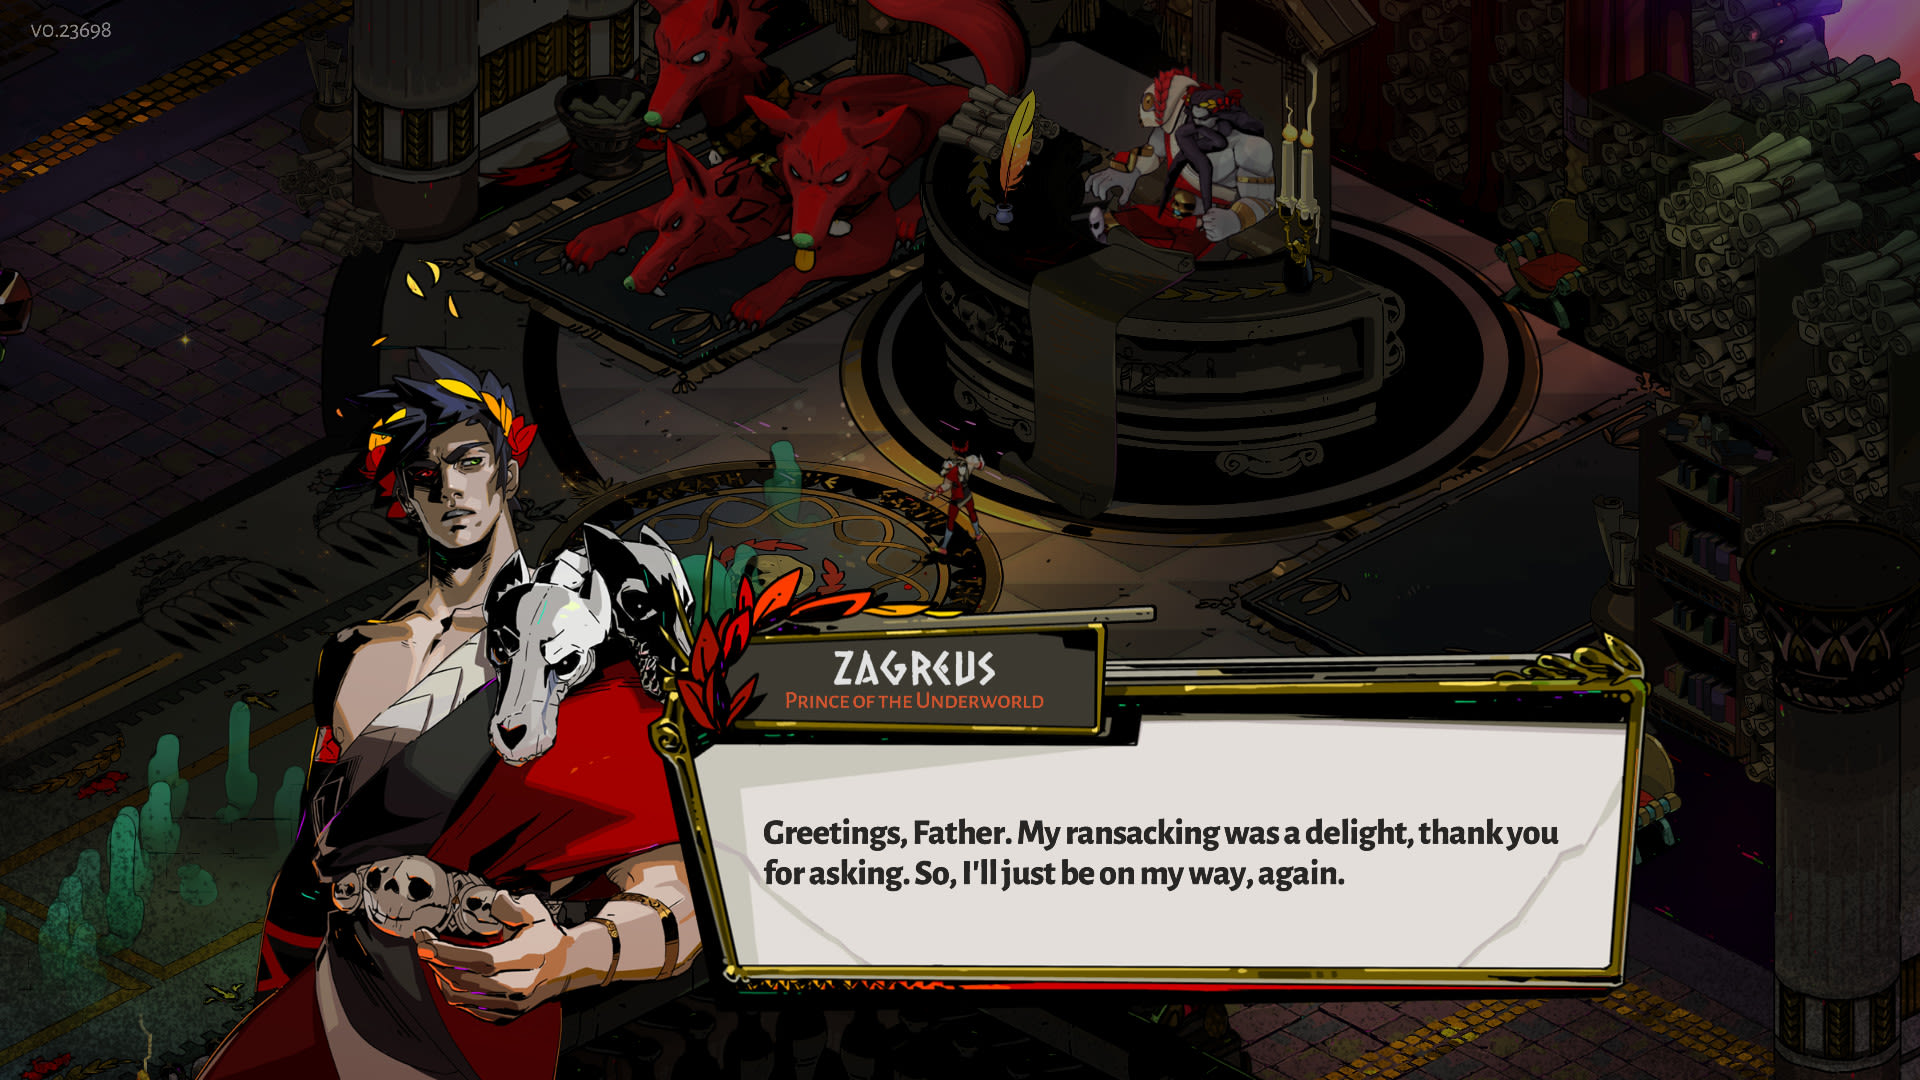 Zagreus saying "Greeting, father. My ransacking was a delight, thank you for asking. So I'll just be on my way, again."